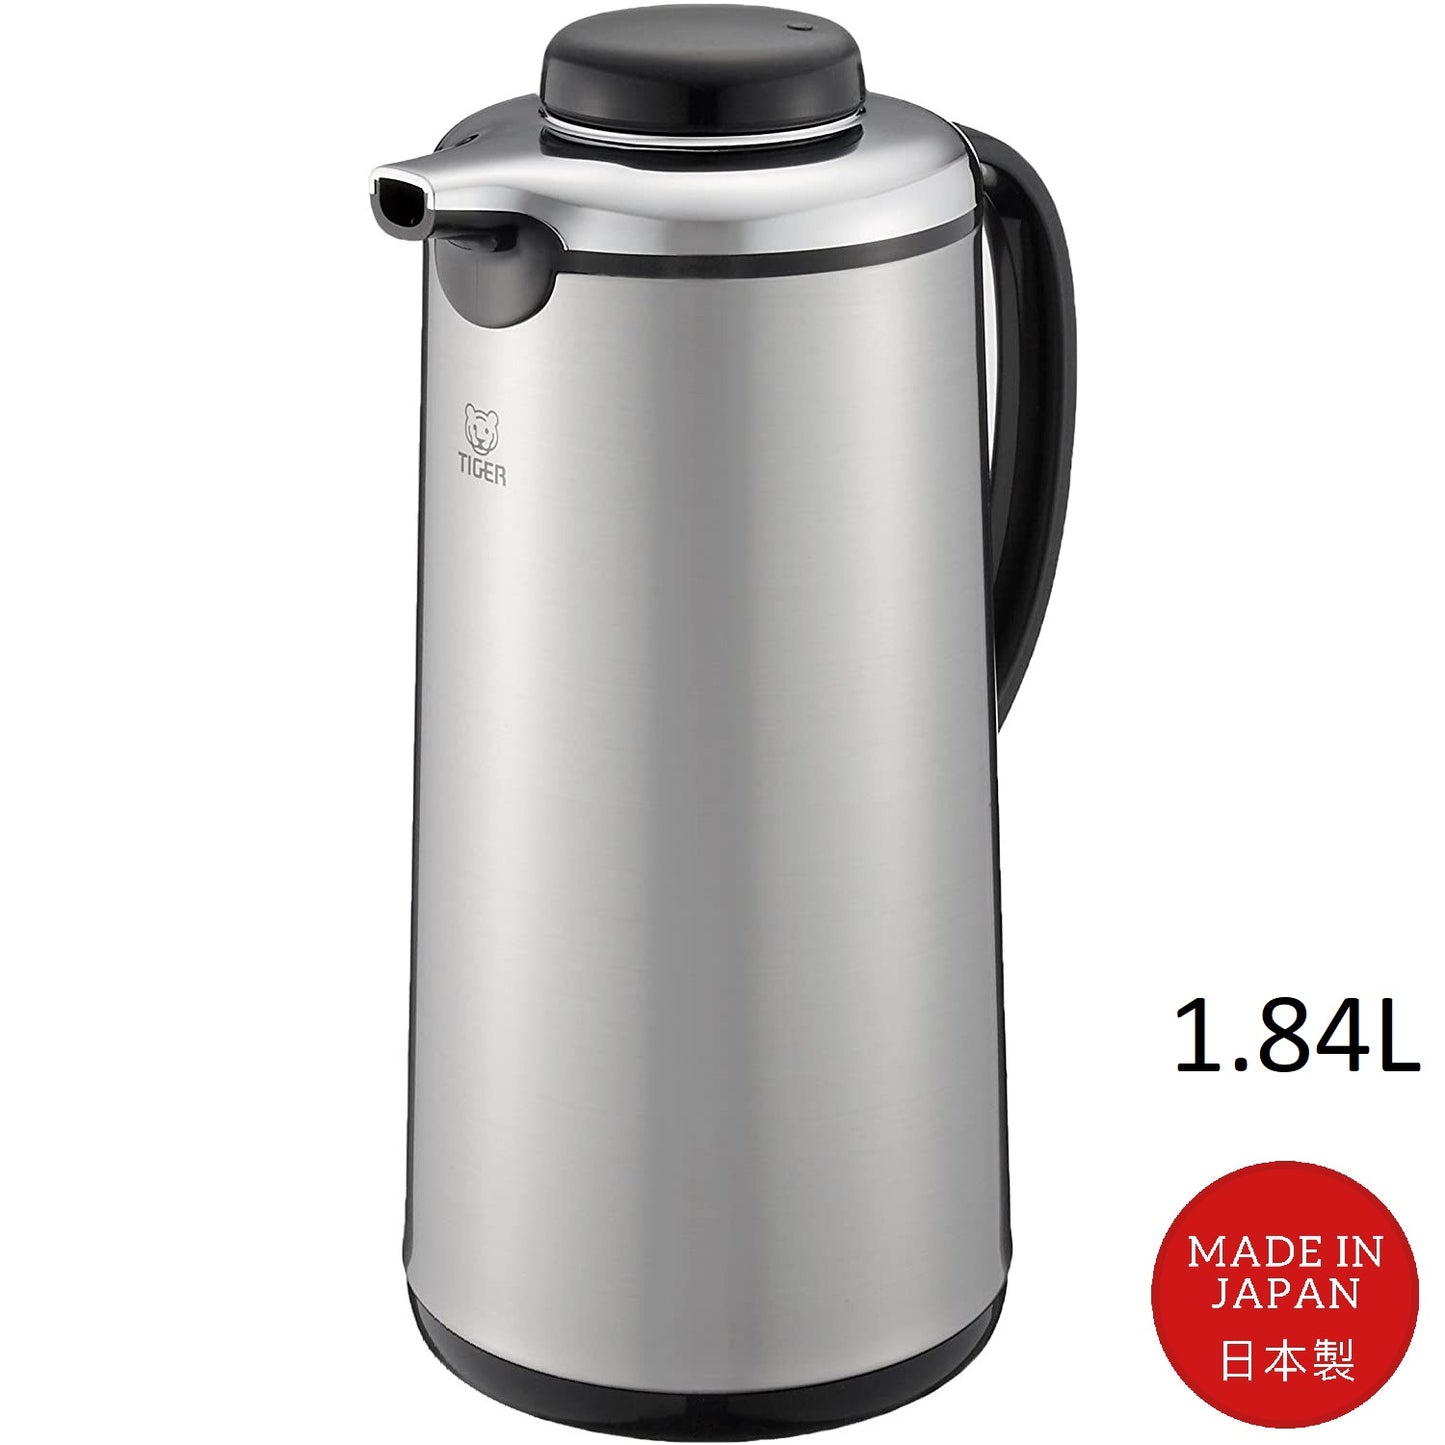 Tiger Vacuum Insulated Stainless Steel Bottle 0.99L/1.84L (Made in Japan)